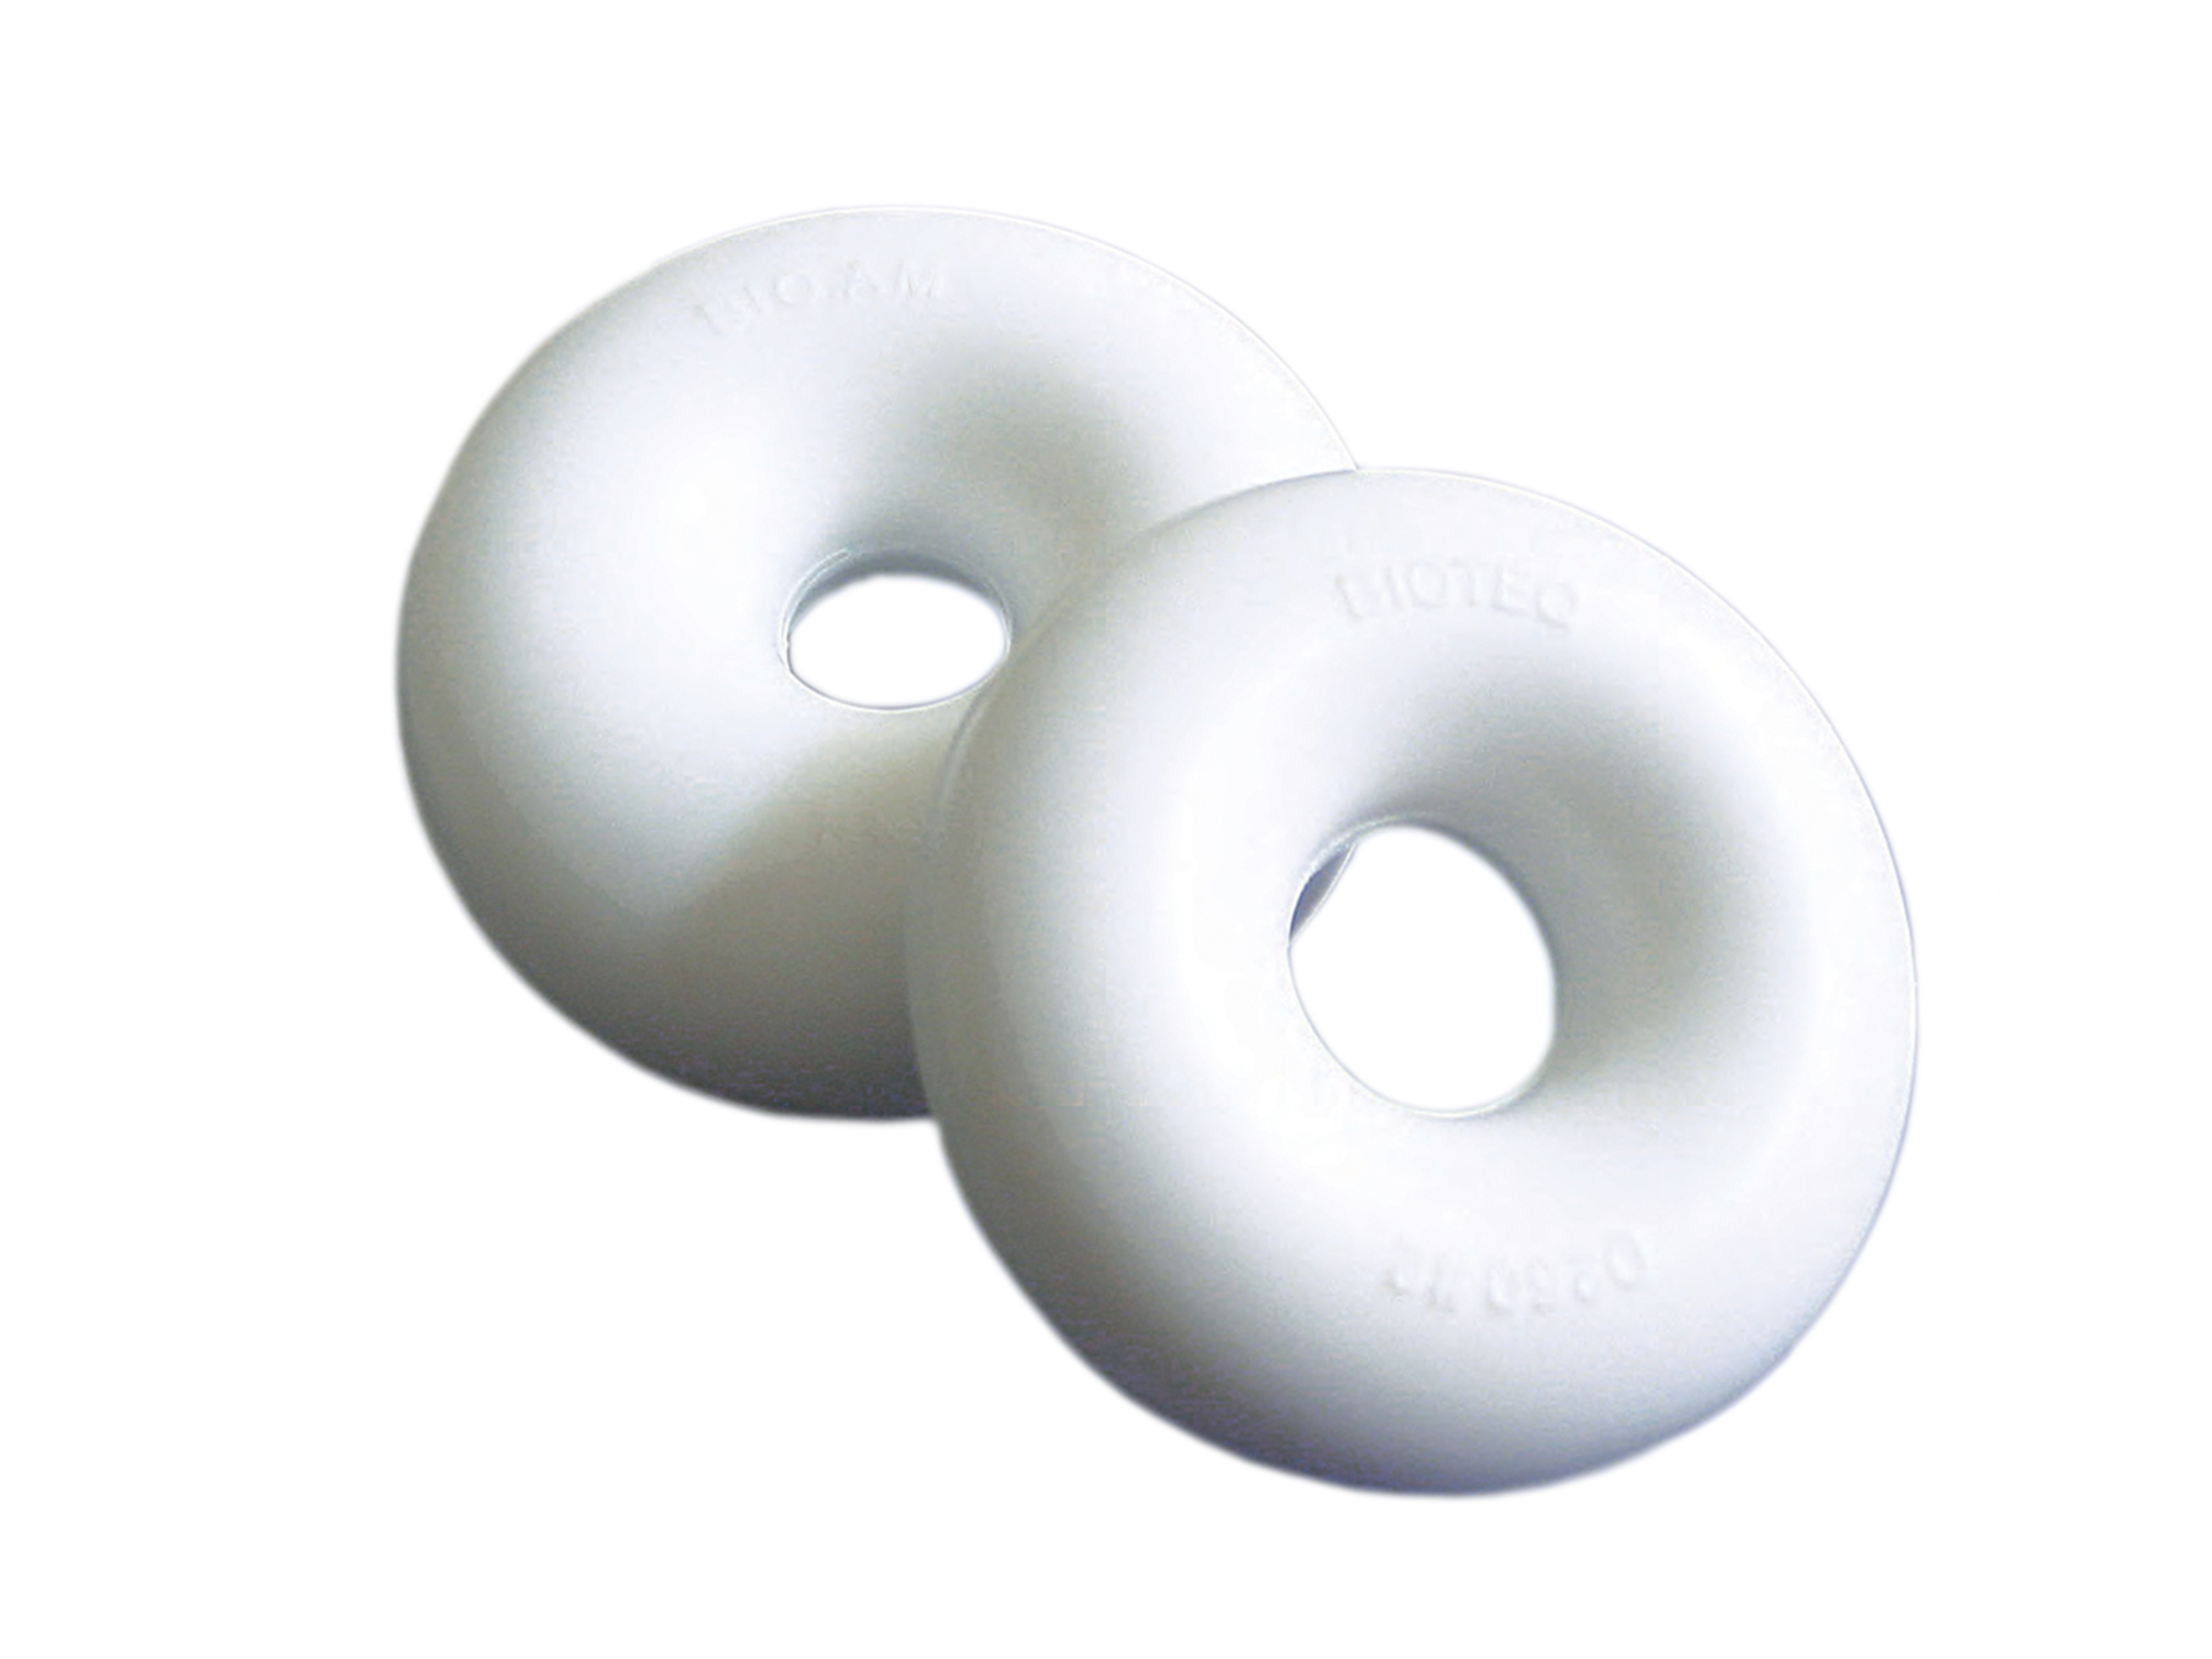 MedGyn Pessary Silicone Donut #1 - 57mm / 2.2"